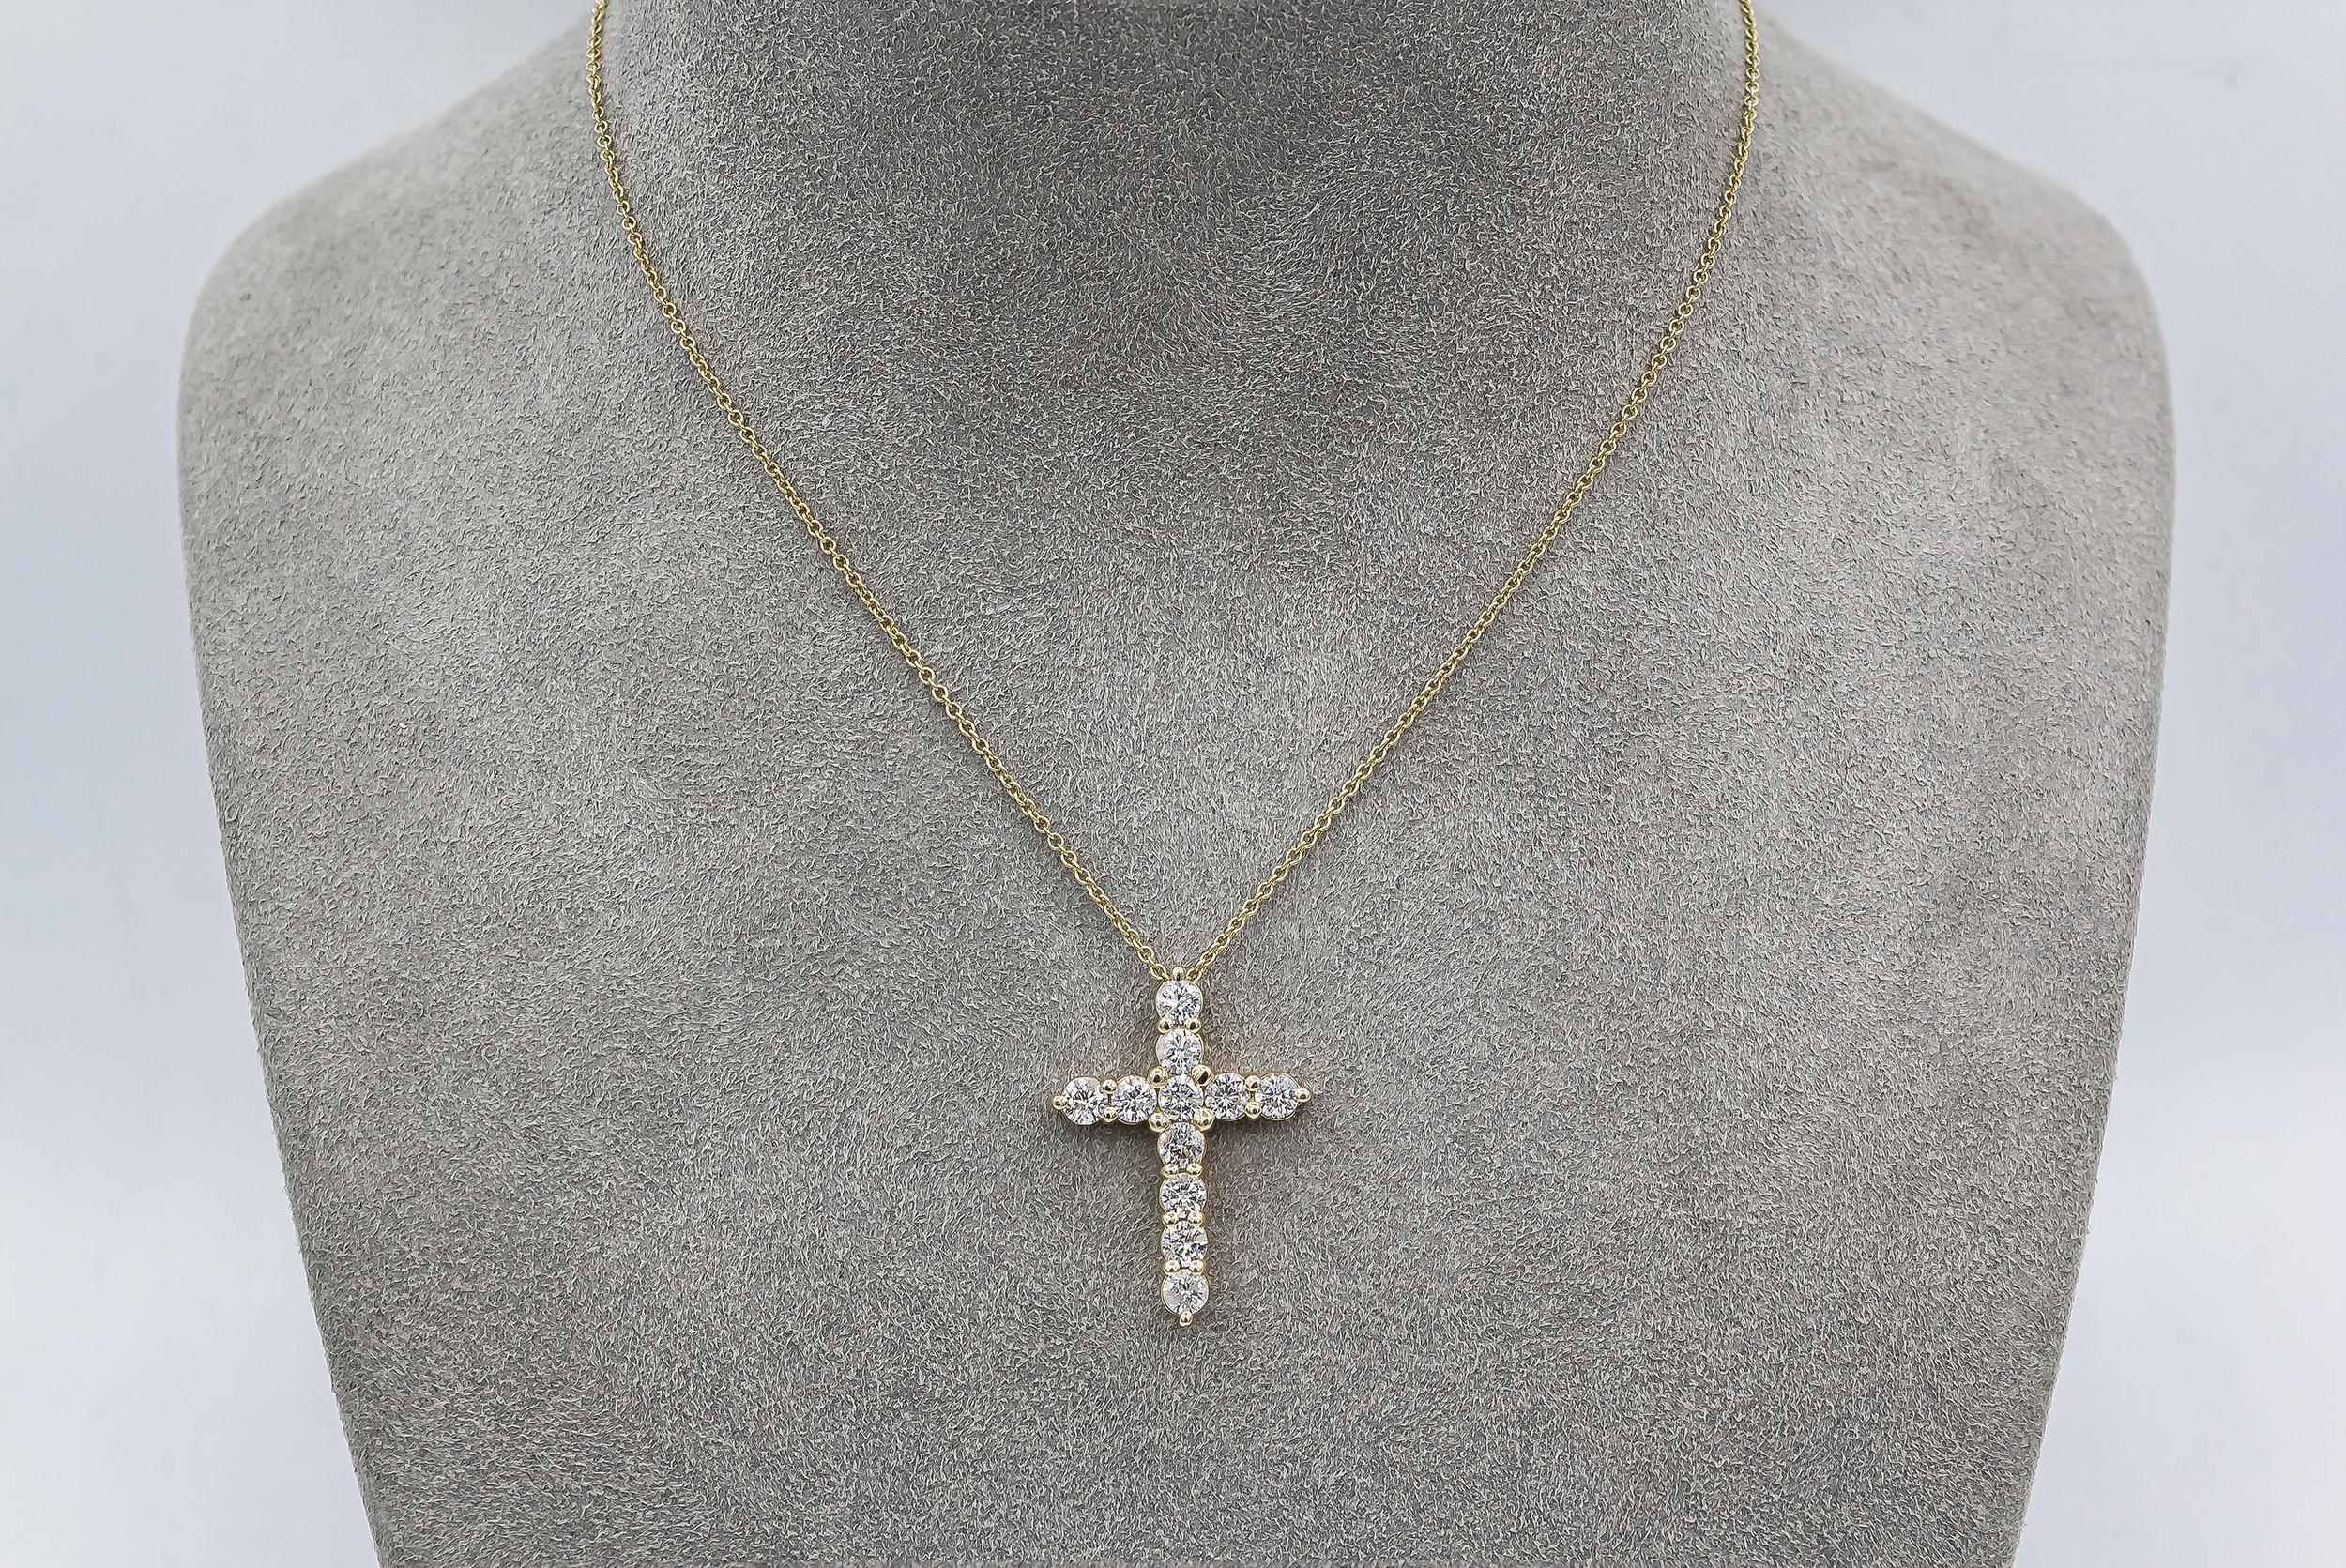 Showcasing round brilliant diamonds set in a religious cross made in 14 karat yellow gold. Diamonds weigh 1.51 carats total. Suspended on an 18 inch yellow gold chain. 

Style available in different price ranges. Prices are based on your selection